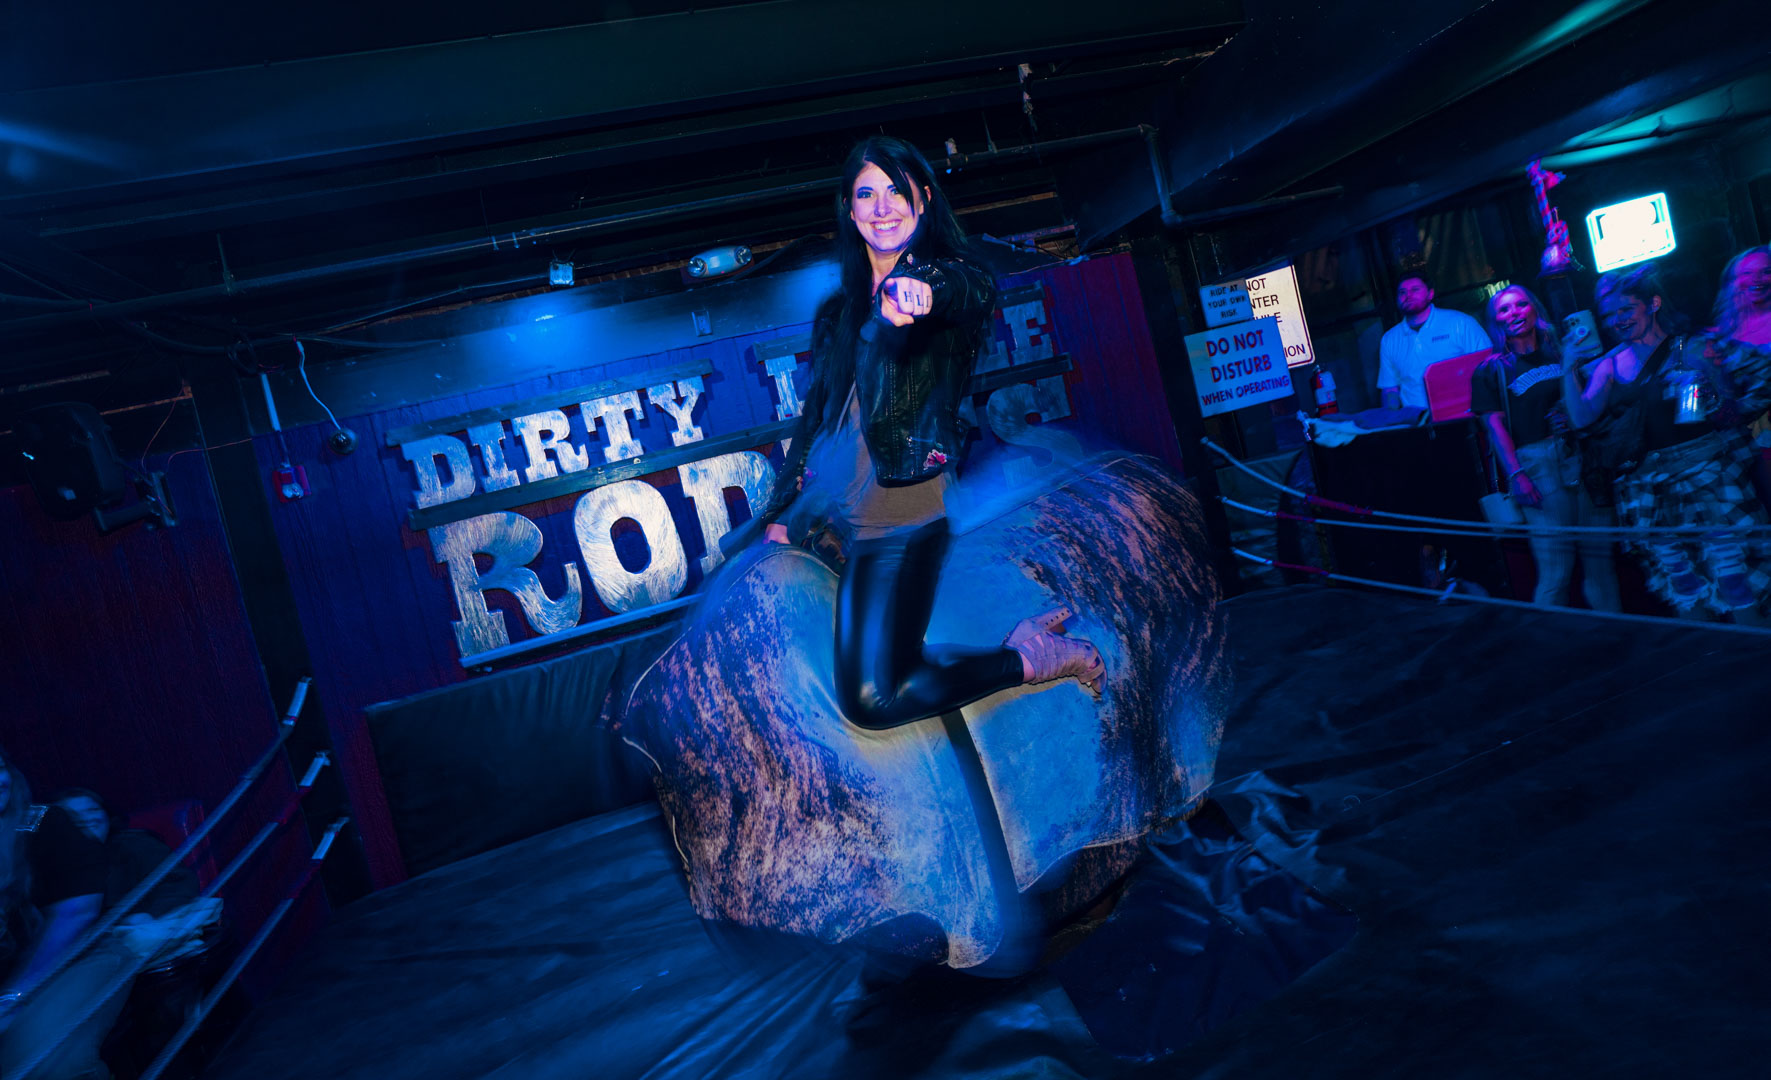 picture of someone riding the bull at Dirty Little Roddys